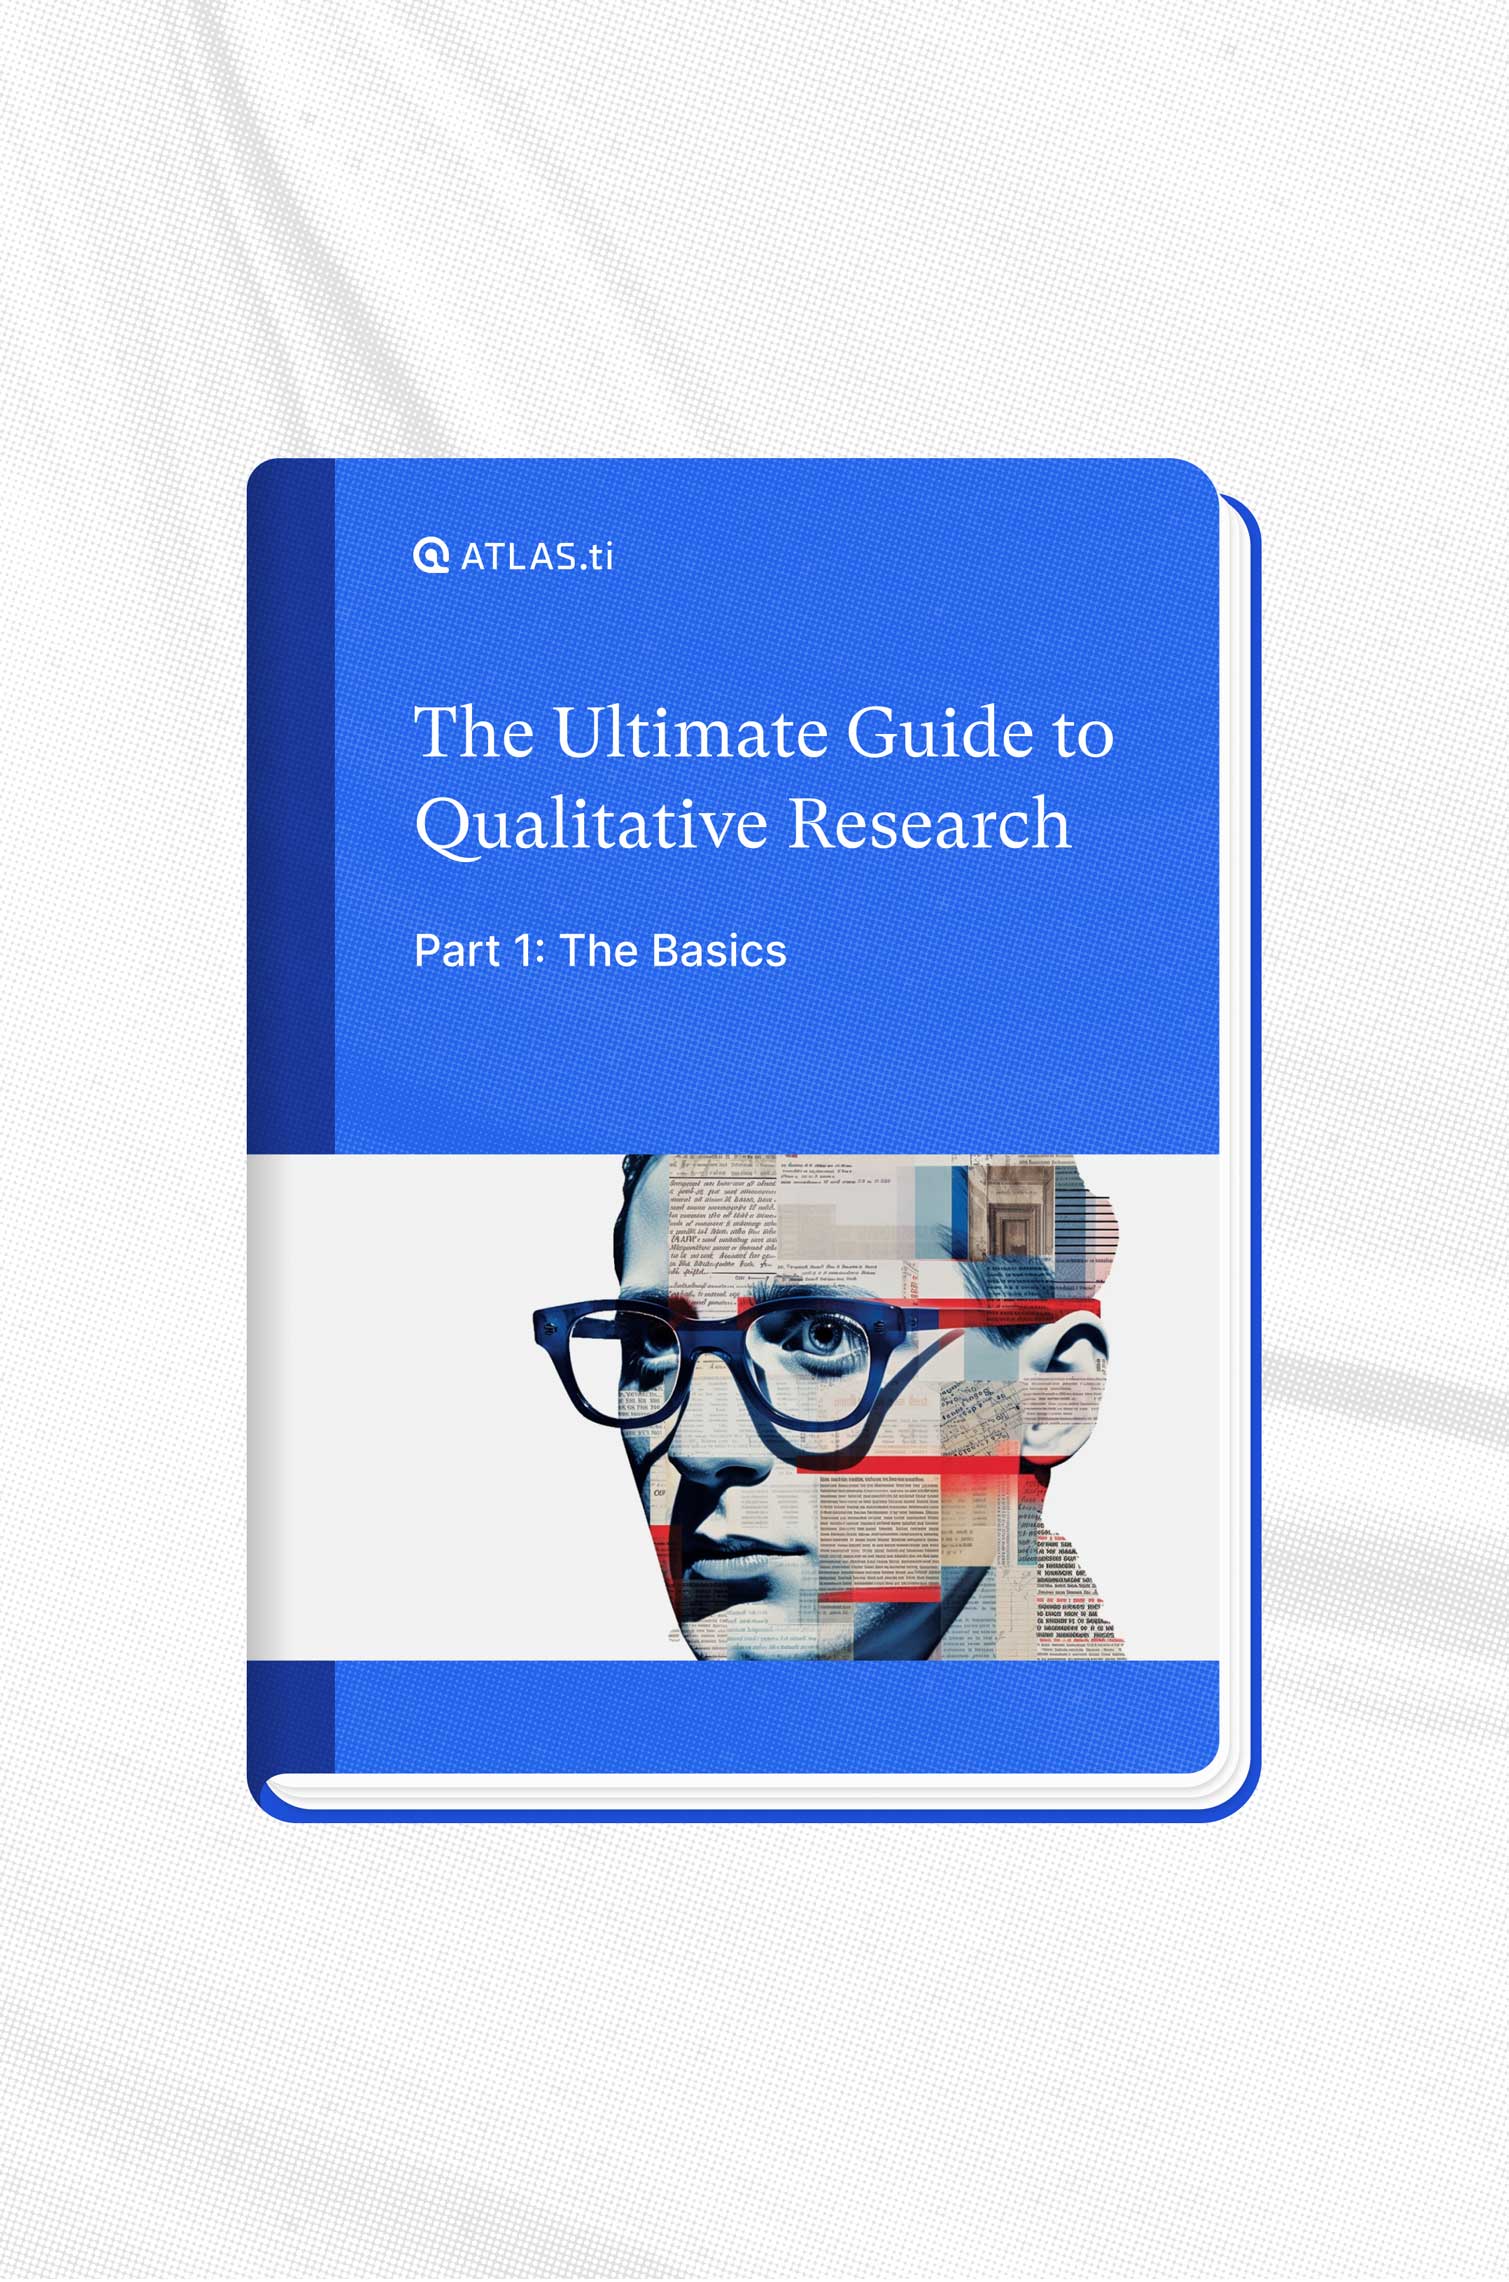 examples of qualitative data in research